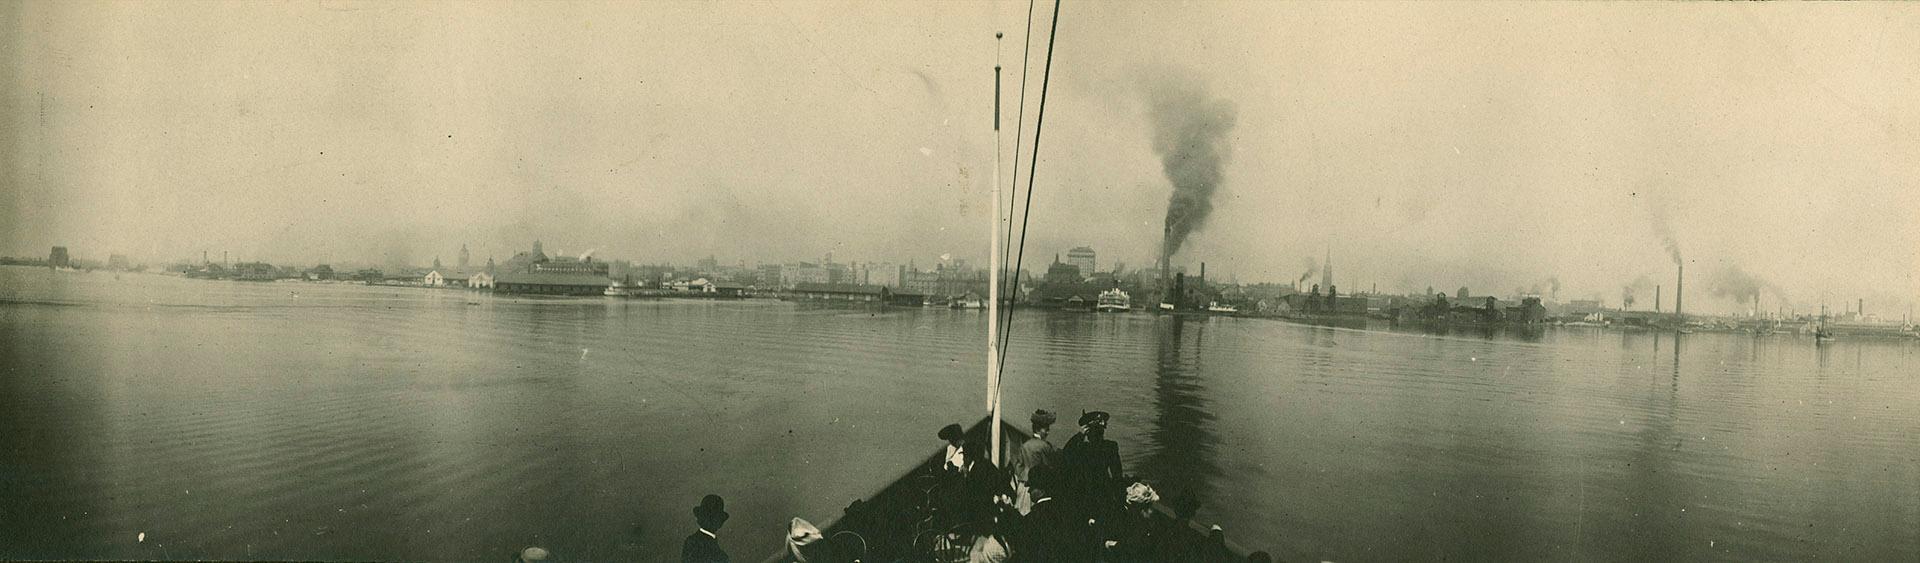 Image shows a number of people on the boat with the Harbour in the far background.